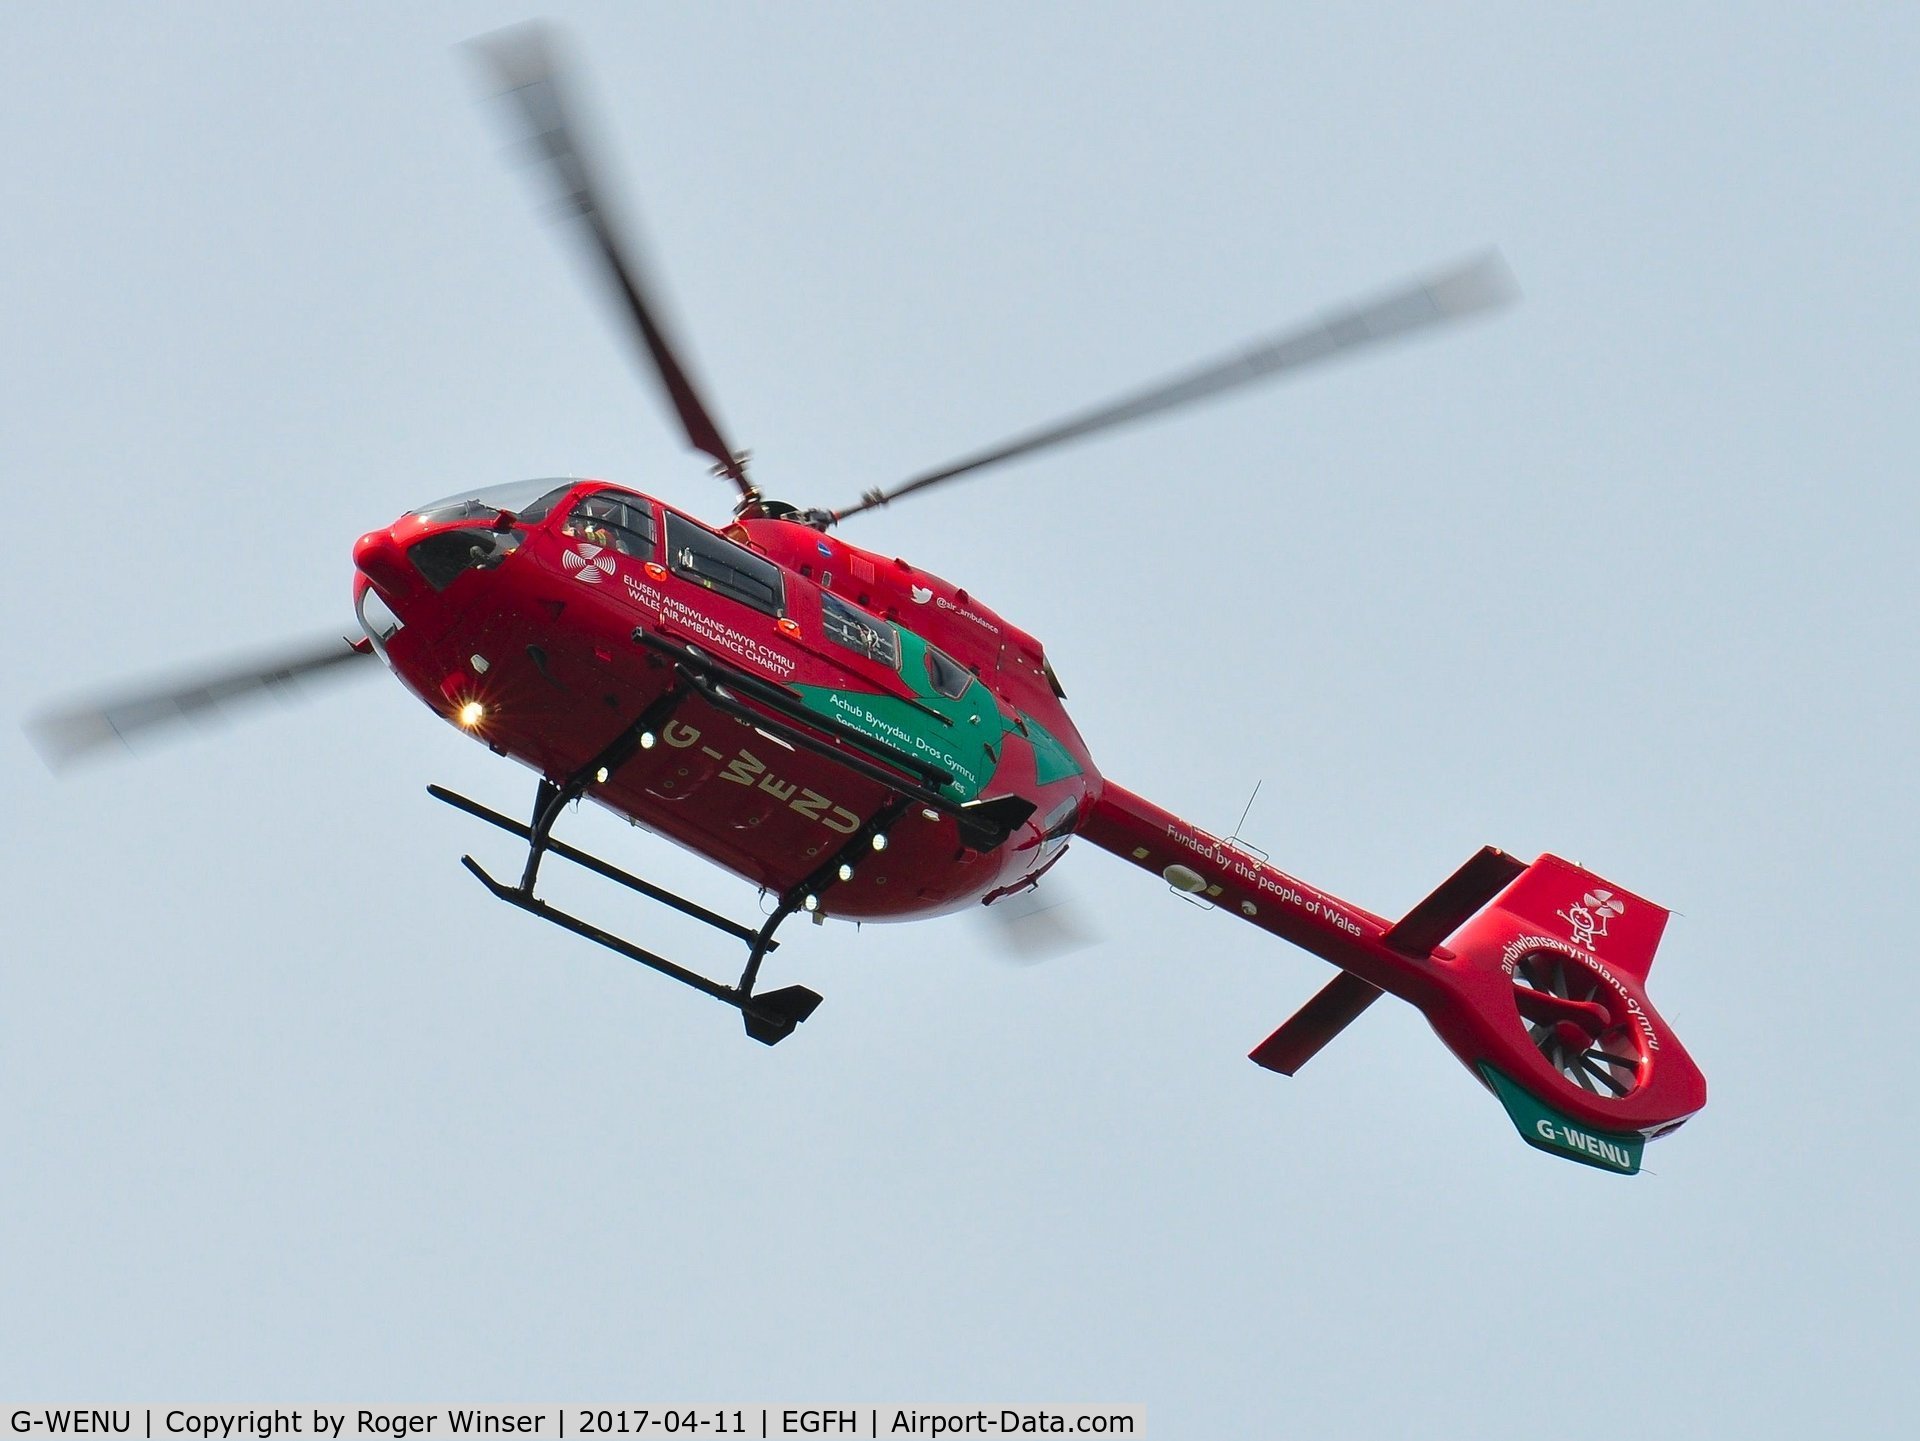 G-WENU, 2016 Airbus Helicopters H-145 (BK-117D-2) C/N 20112, Wales Air Ambulance's newest helicopter (Helimed 57) based at Dafen, Llanelli since late March/early April 2017 seen making a practice aproach to Runway 22 at Swansea Airport.